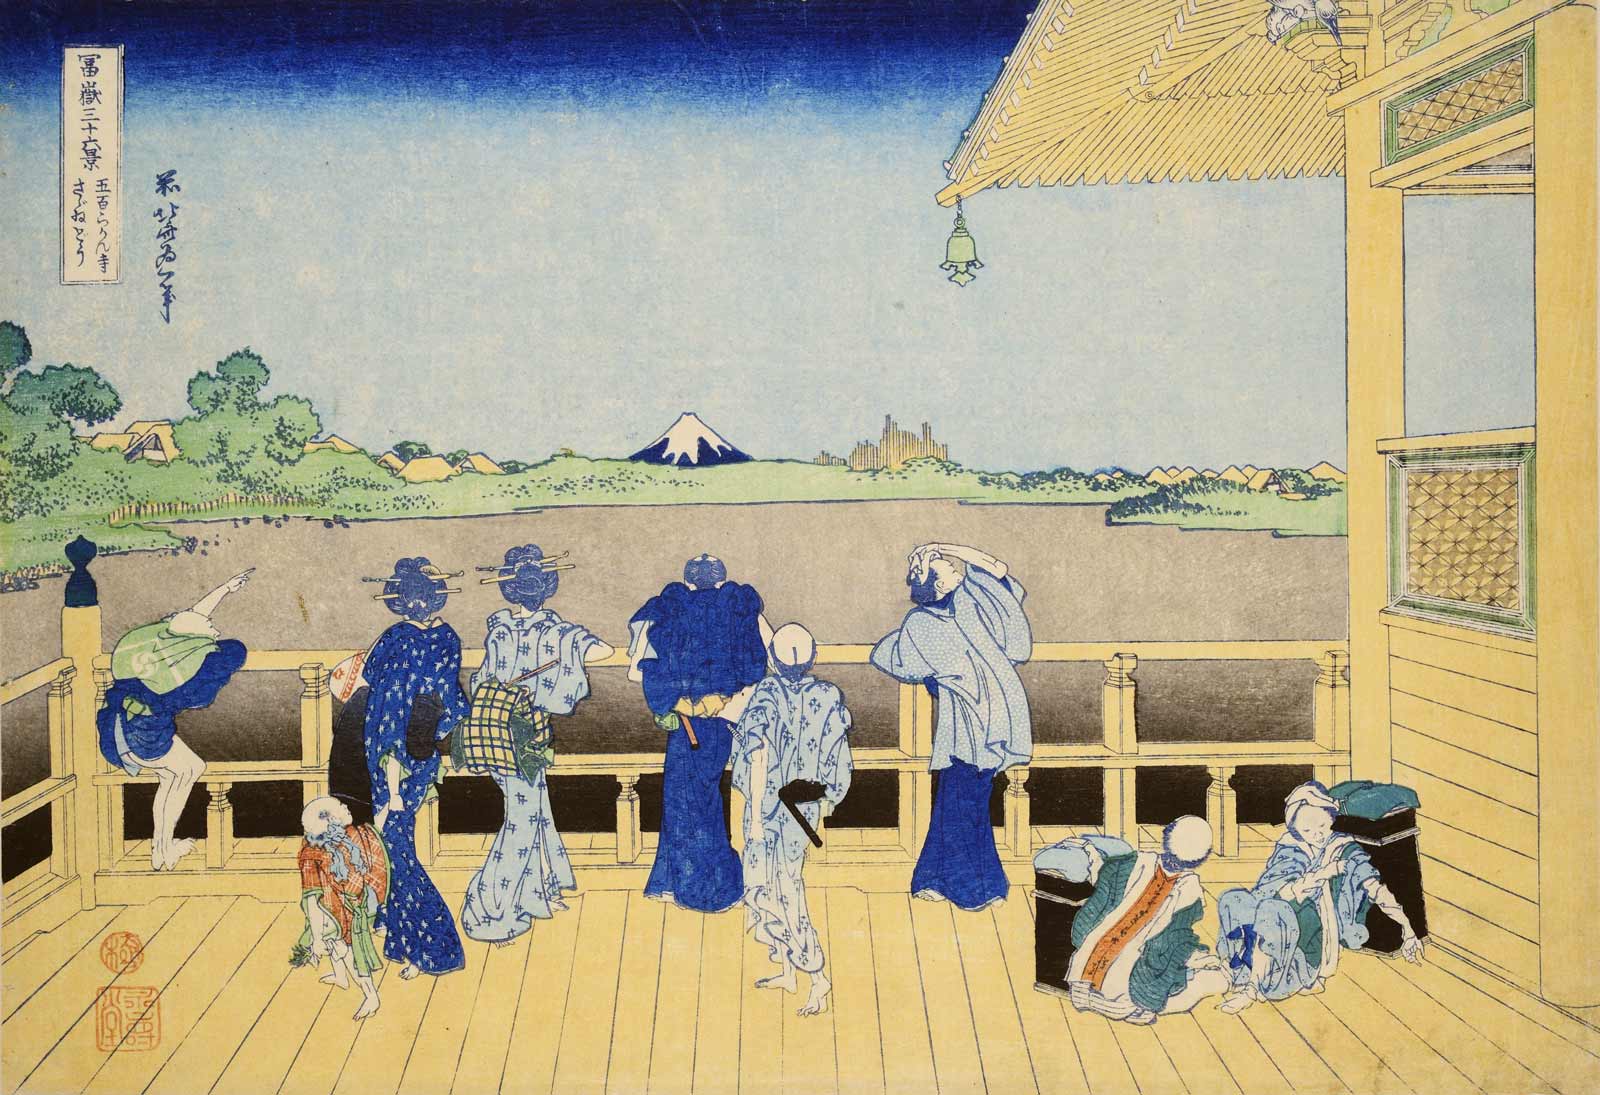 Fig. 3 Katsushika Hokusai, Gohyakurakanji Sazaidô (The Turban Shell Hall of the Five Hundred Arhat Temple), from the series Thirty-Six Views of Mount Fuji, Edo period, c. 1832. Color woodcut, 25.4 × 36.9 cm. Dutch National Museum of World Cultures, Inv. Nr. RV-4067-4. While Japanese prints were best known for their two-dimensional effect, the influence of European linear perspective with a vanishing point can be seen here.